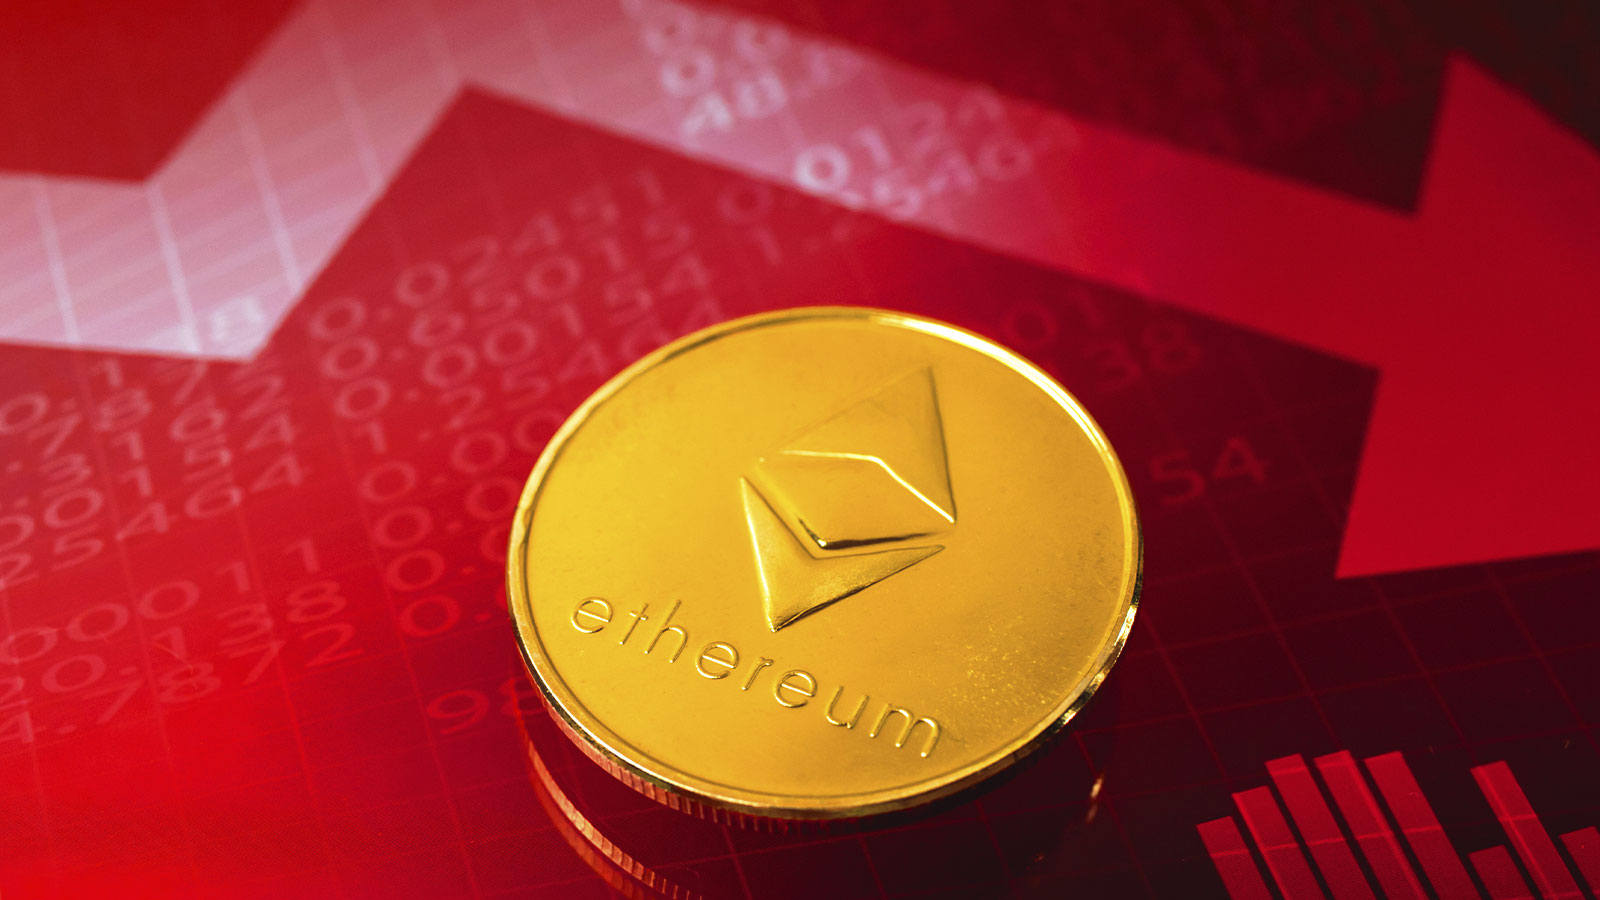 Here’s Why Ethereum’s Price Crashed So Low Since Merge: Details